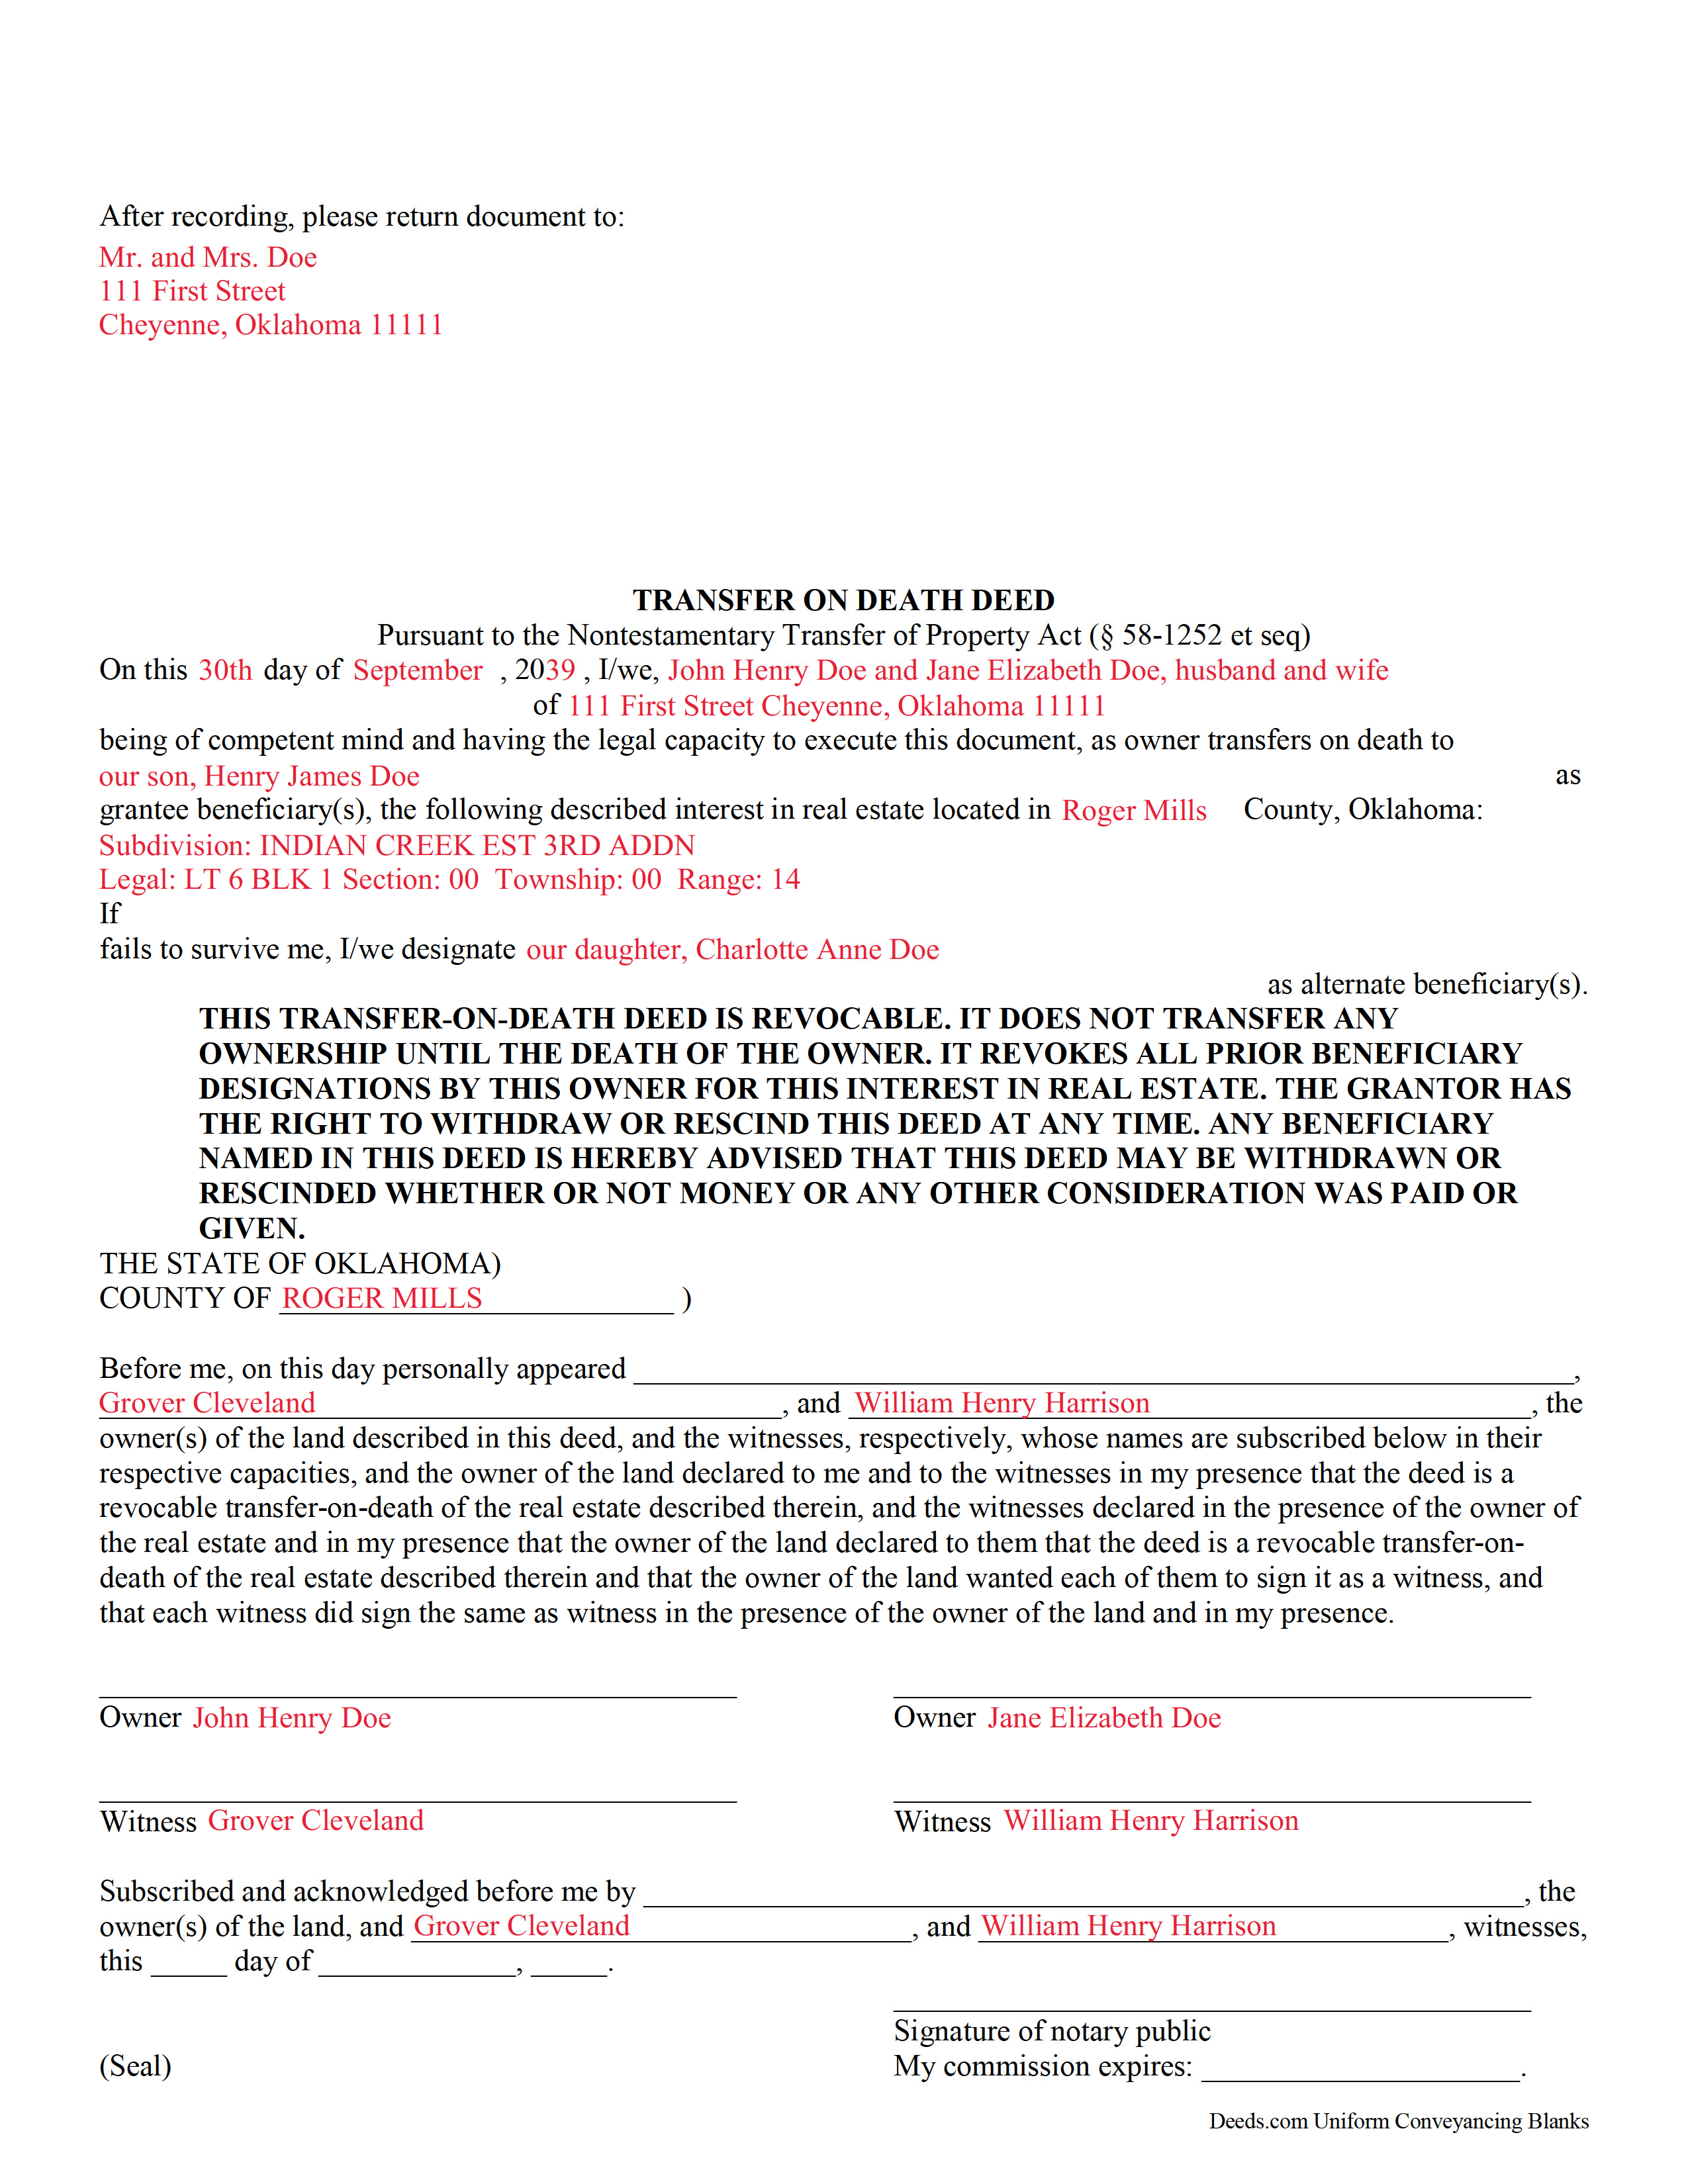 Completed Example of the Transfer on Death Deed Form